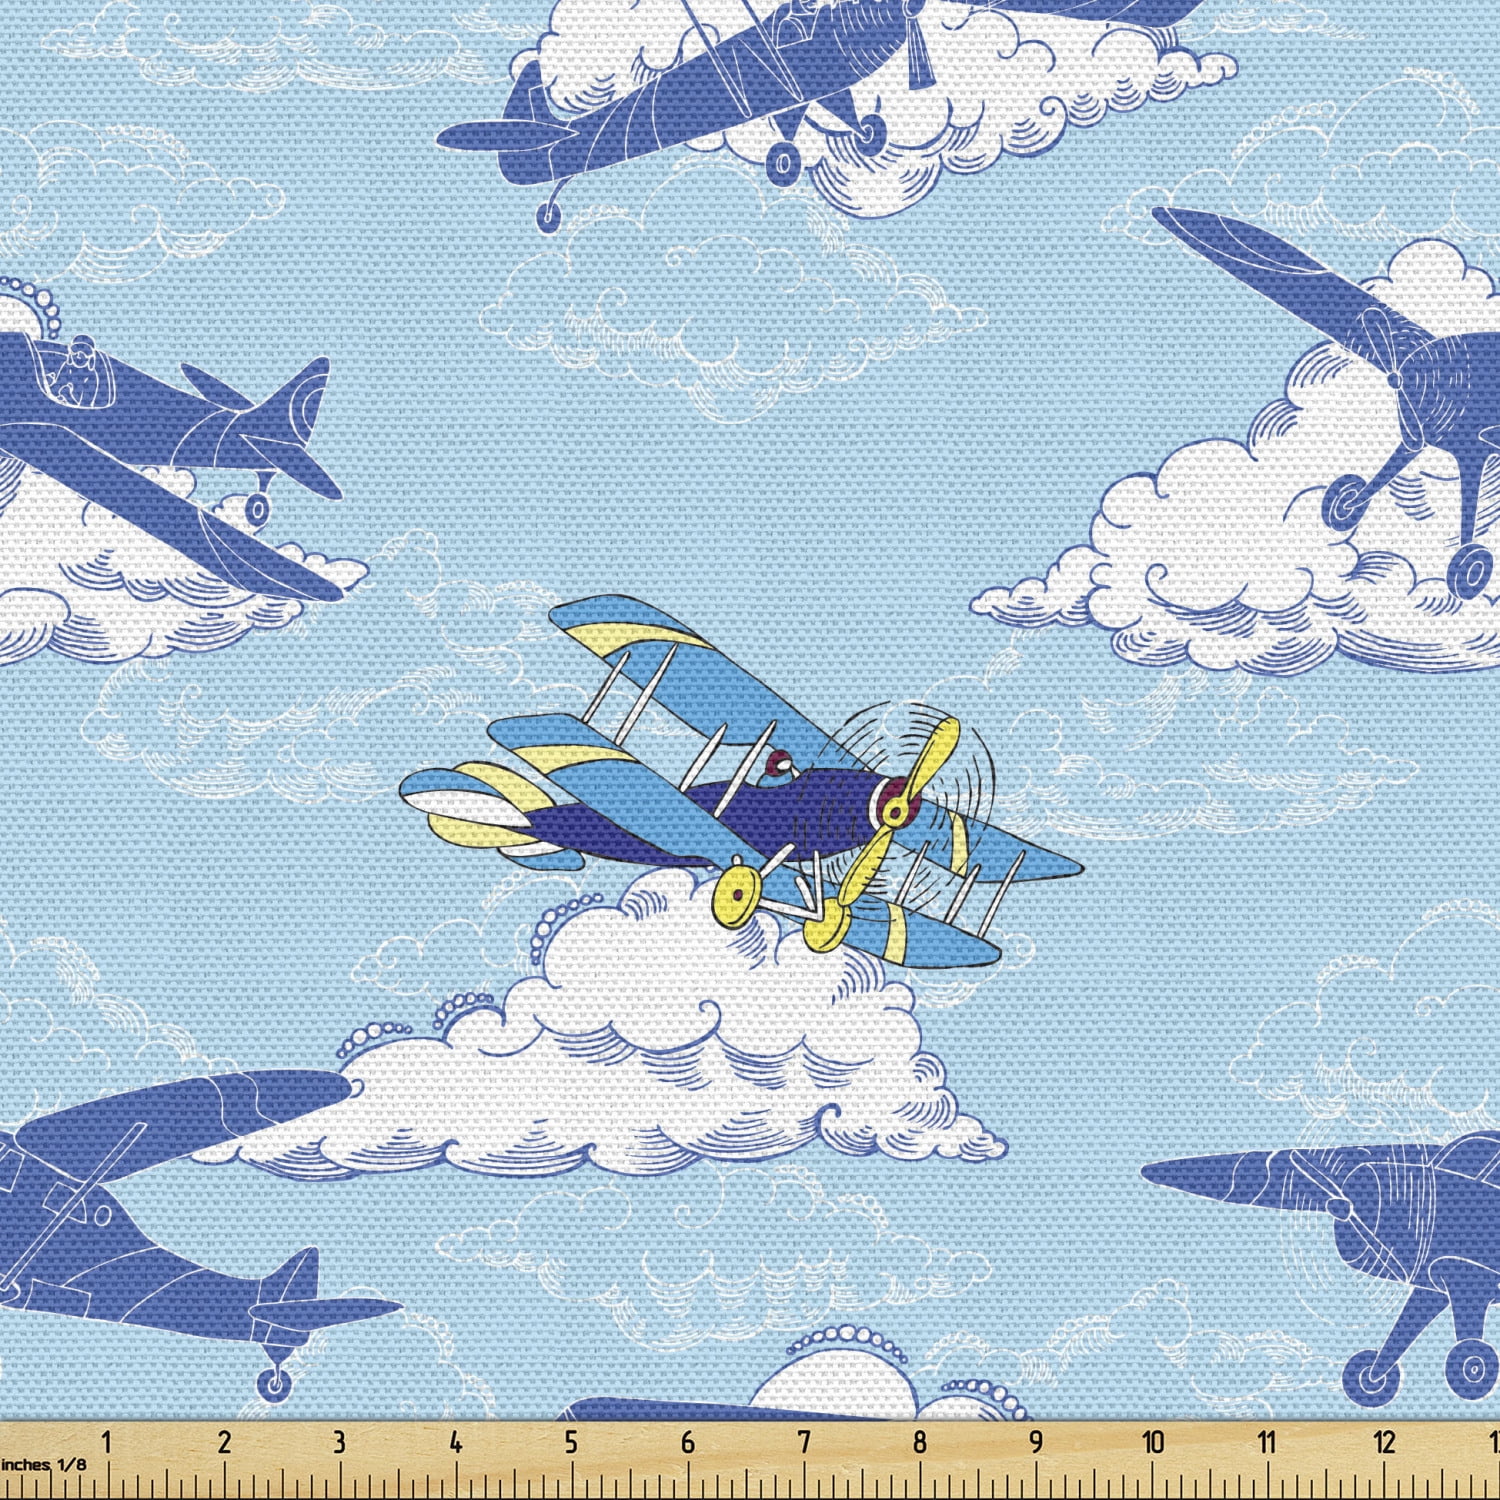 Lunarable Vintage Airplane Throw Blanket Bluegrey and Pale Blue 50 x 70 Aircraft Silhouette Flying Over The City on Pastel Background Flannel Fleece Accent Piece Soft Couch Cover for Adults